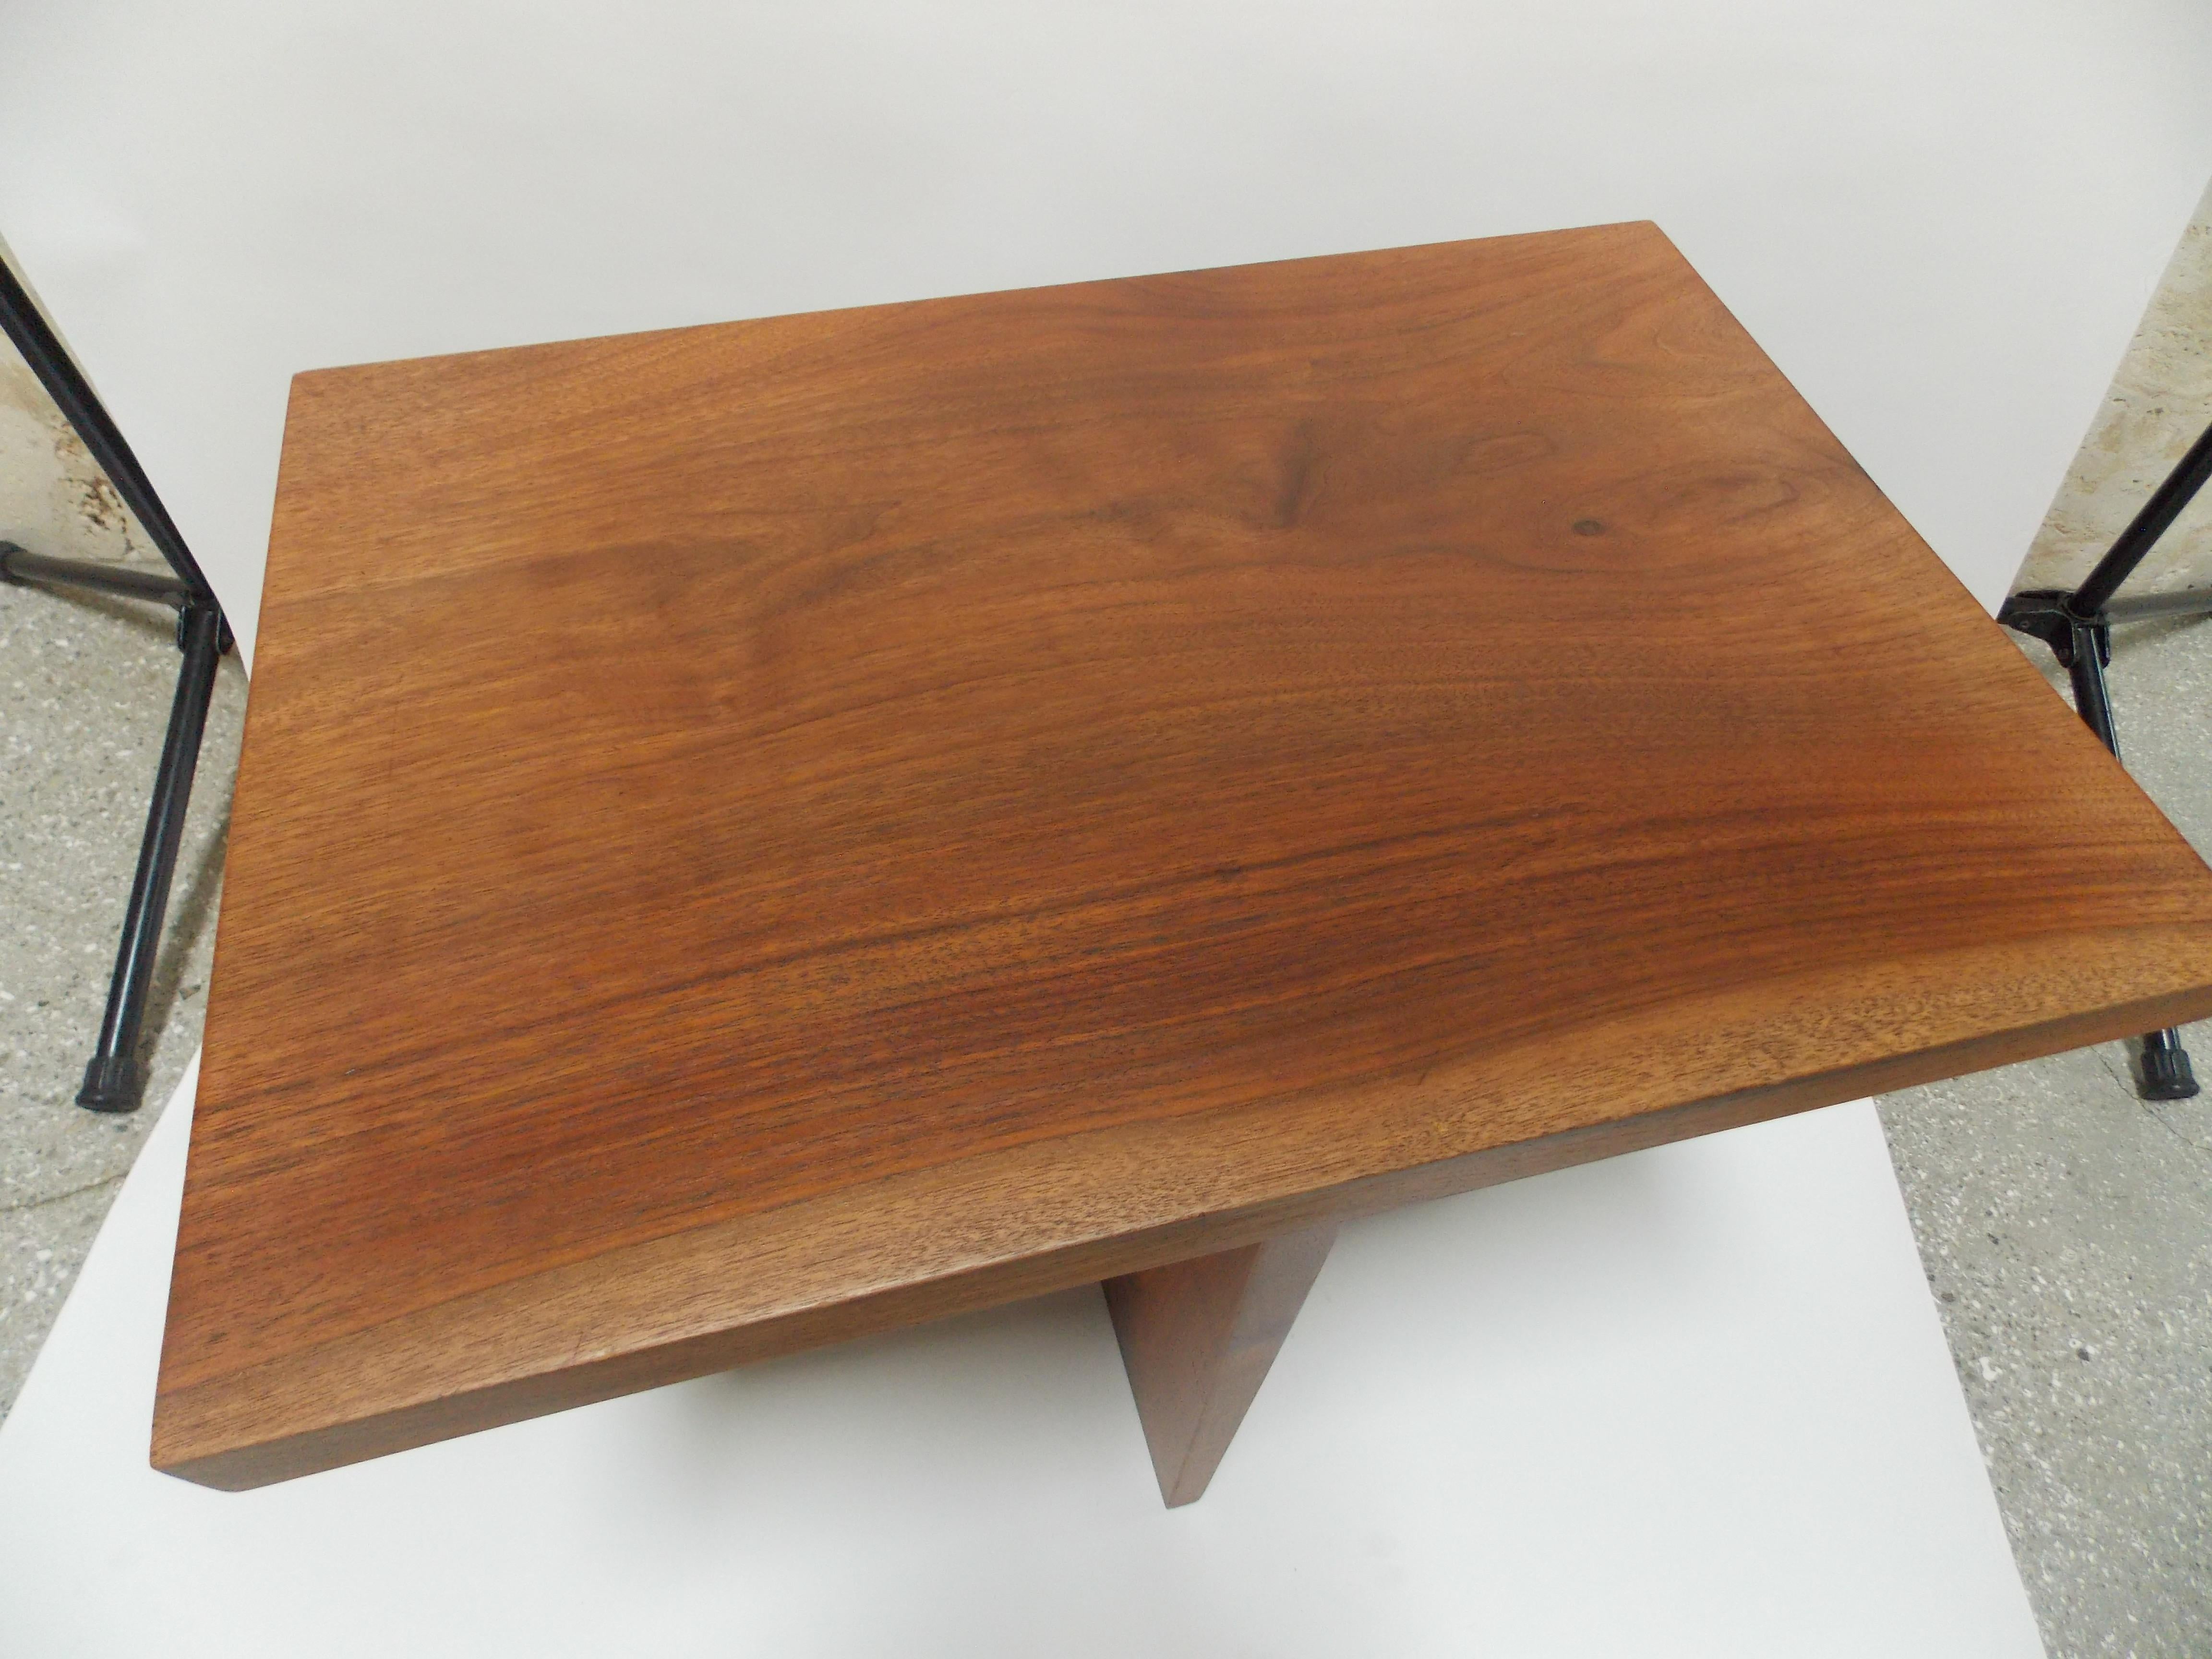 A walnut table designed by George Nakashima
clients name on underside of table top.
expressive grain on both table top and center pedestal.